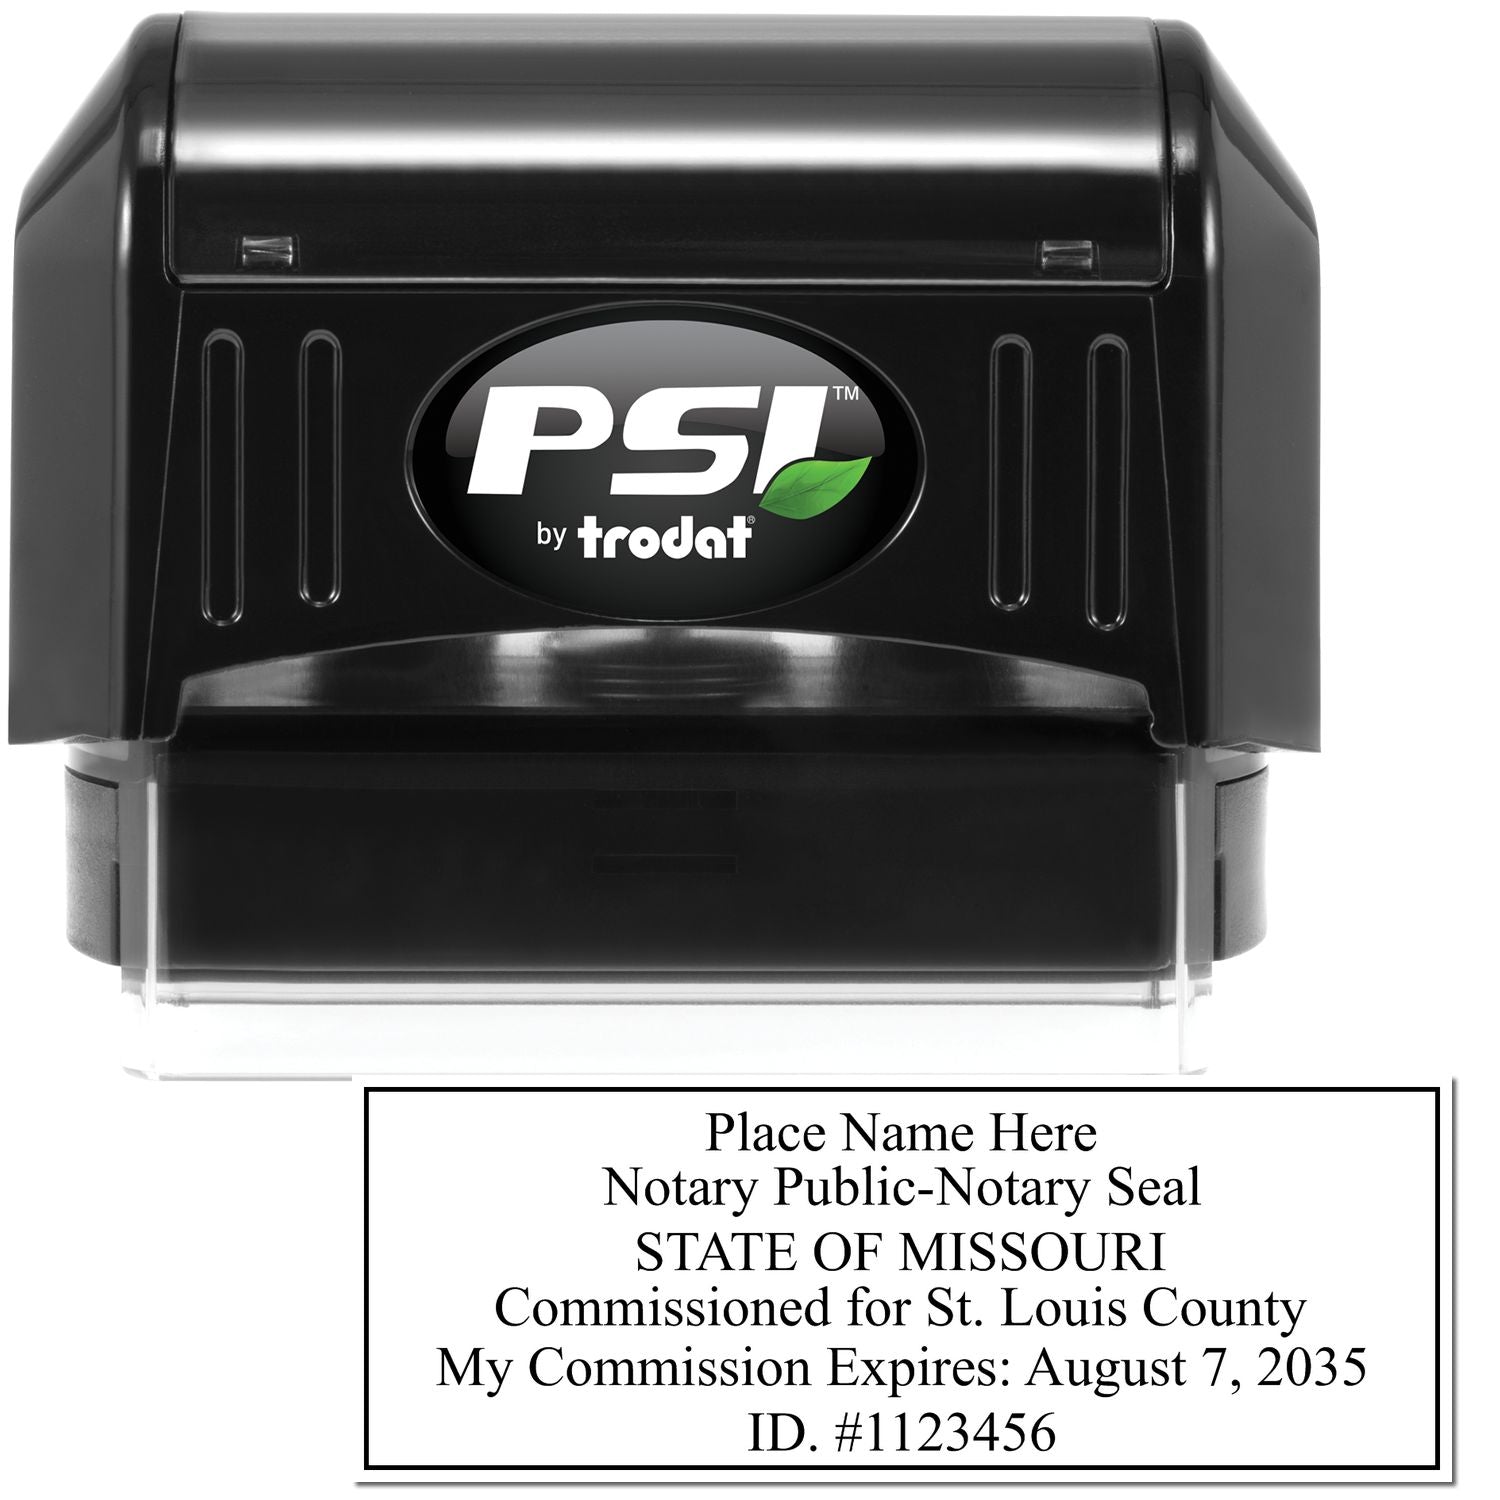 The main image for the PSI Missouri Notary Stamp depicting a sample of the imprint and electronic files